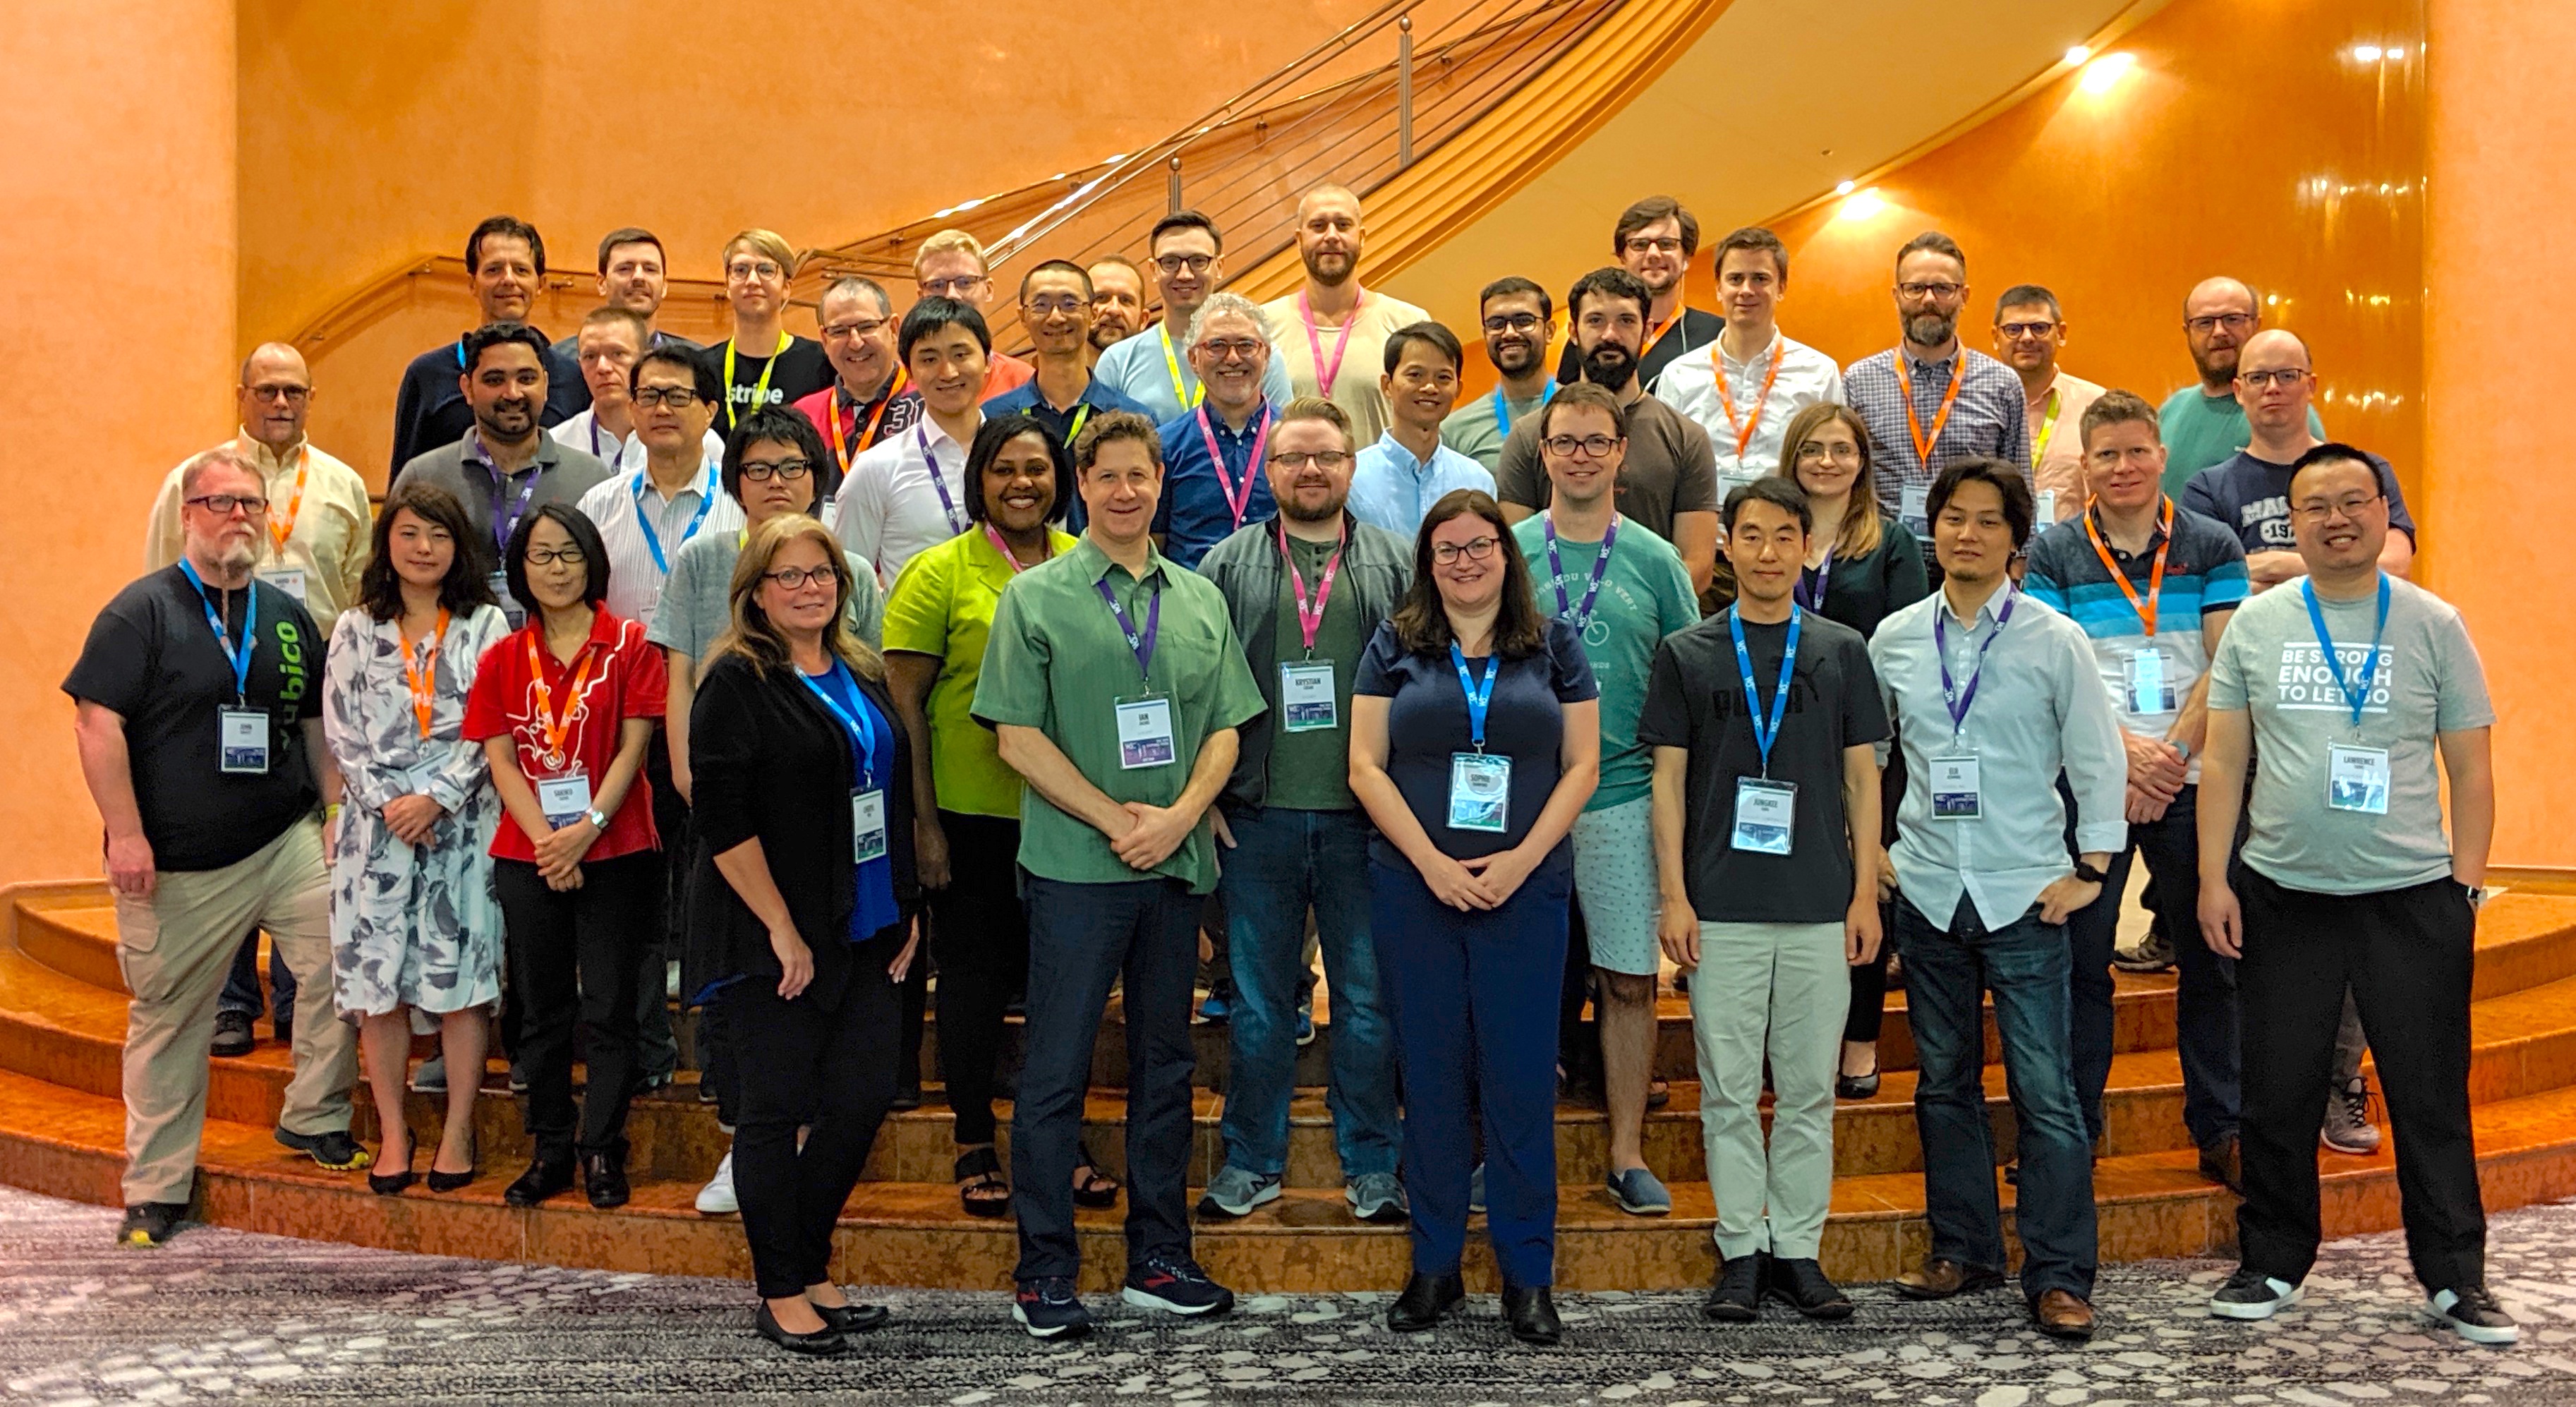 Web Payments Working Group and guests at TPAC 2019